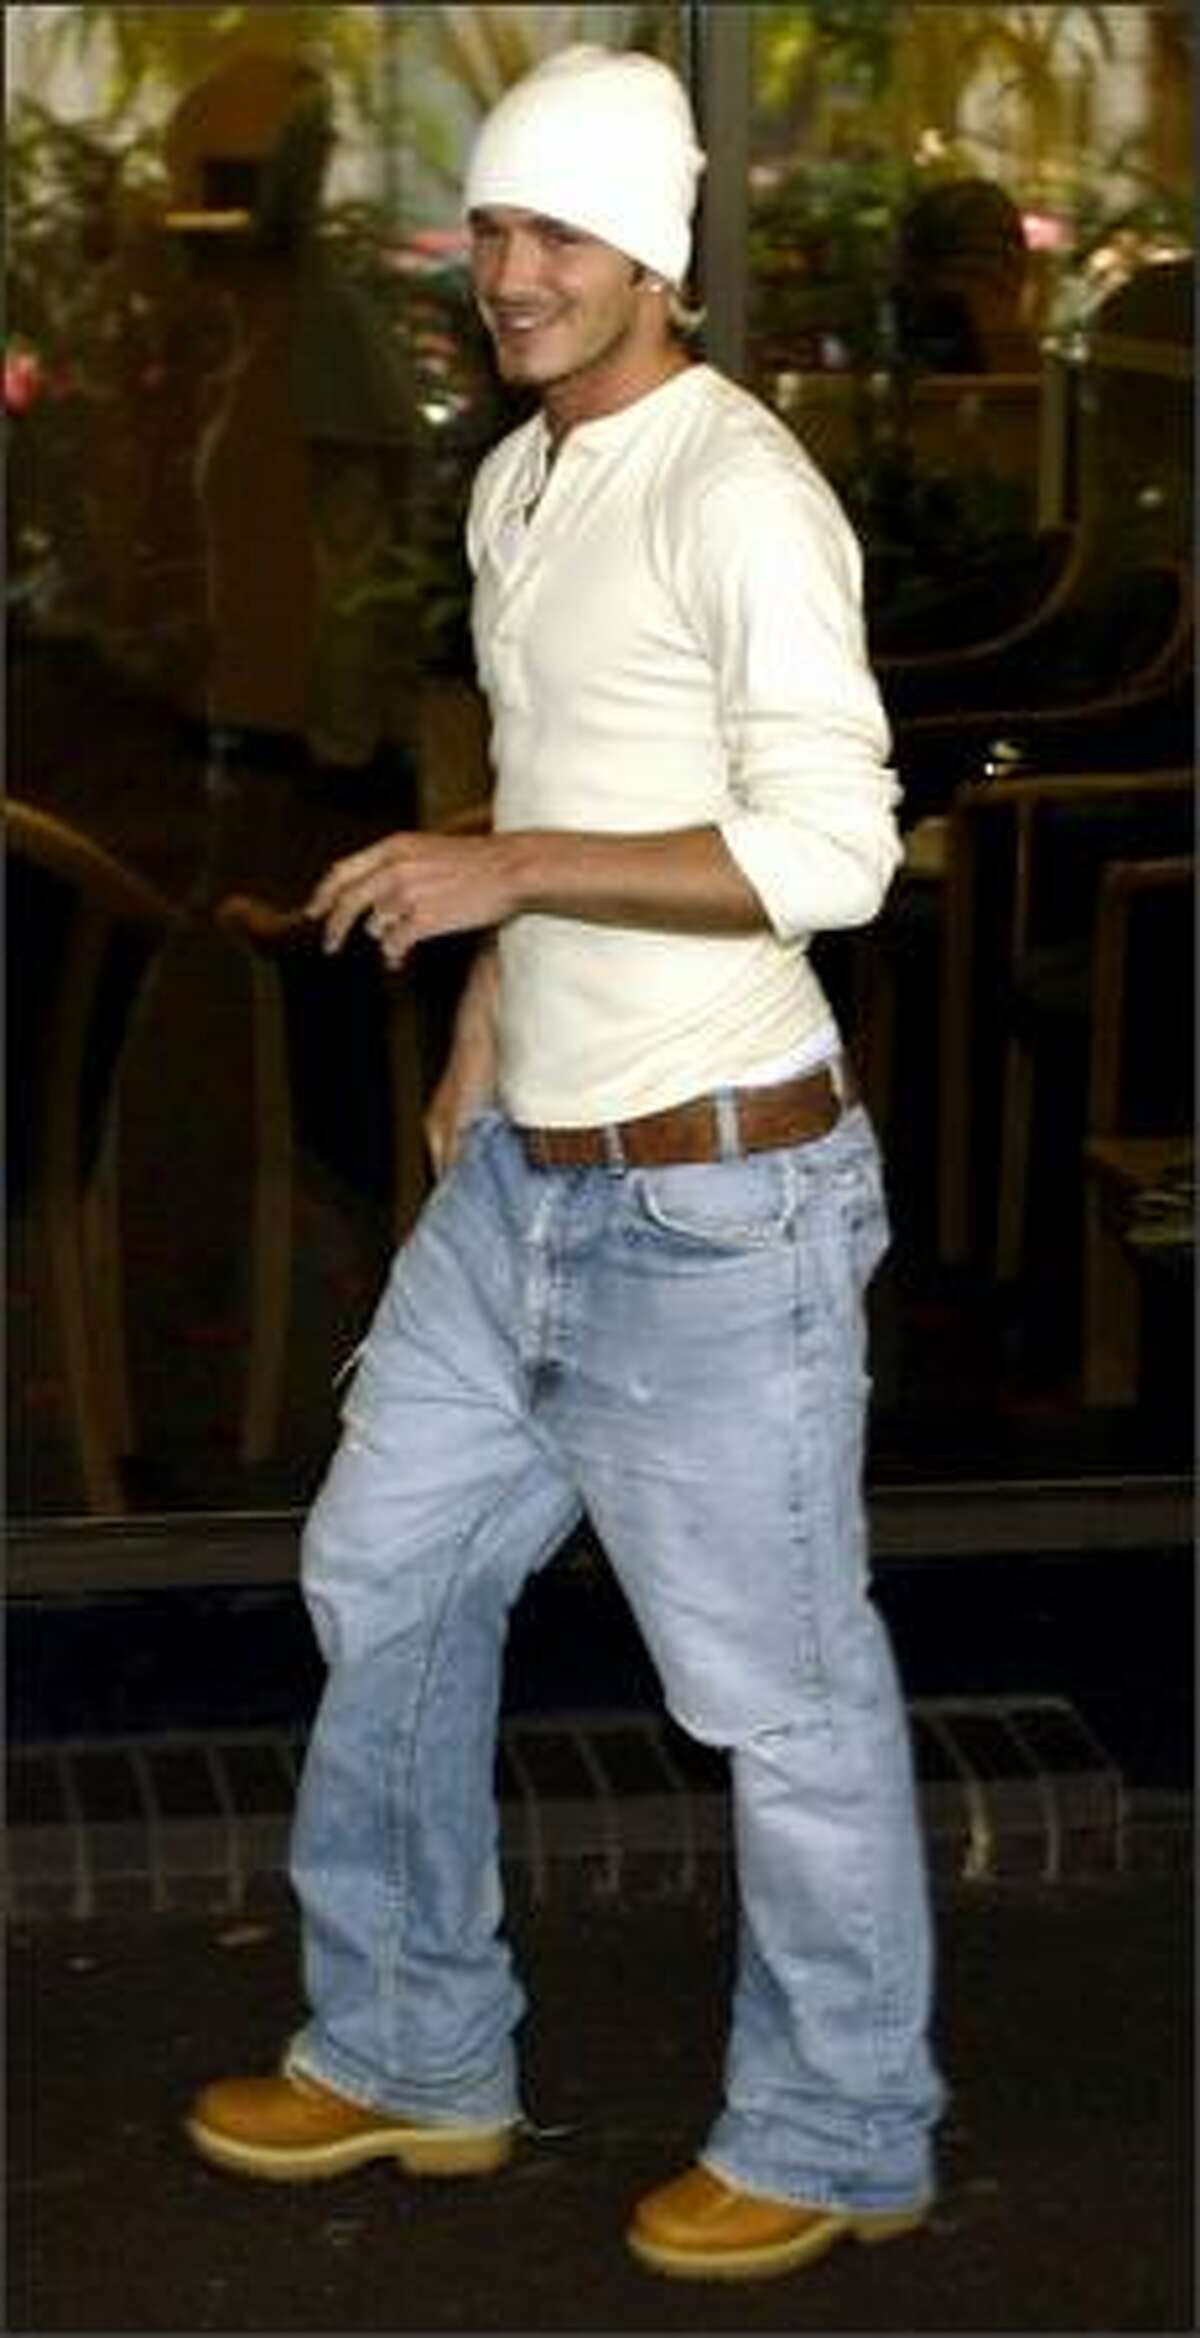 David Beckham walks from the hospital entrance to inform the waiting media of the birth of his baby boy, Romeo, Sept. 1, 2002 in London.